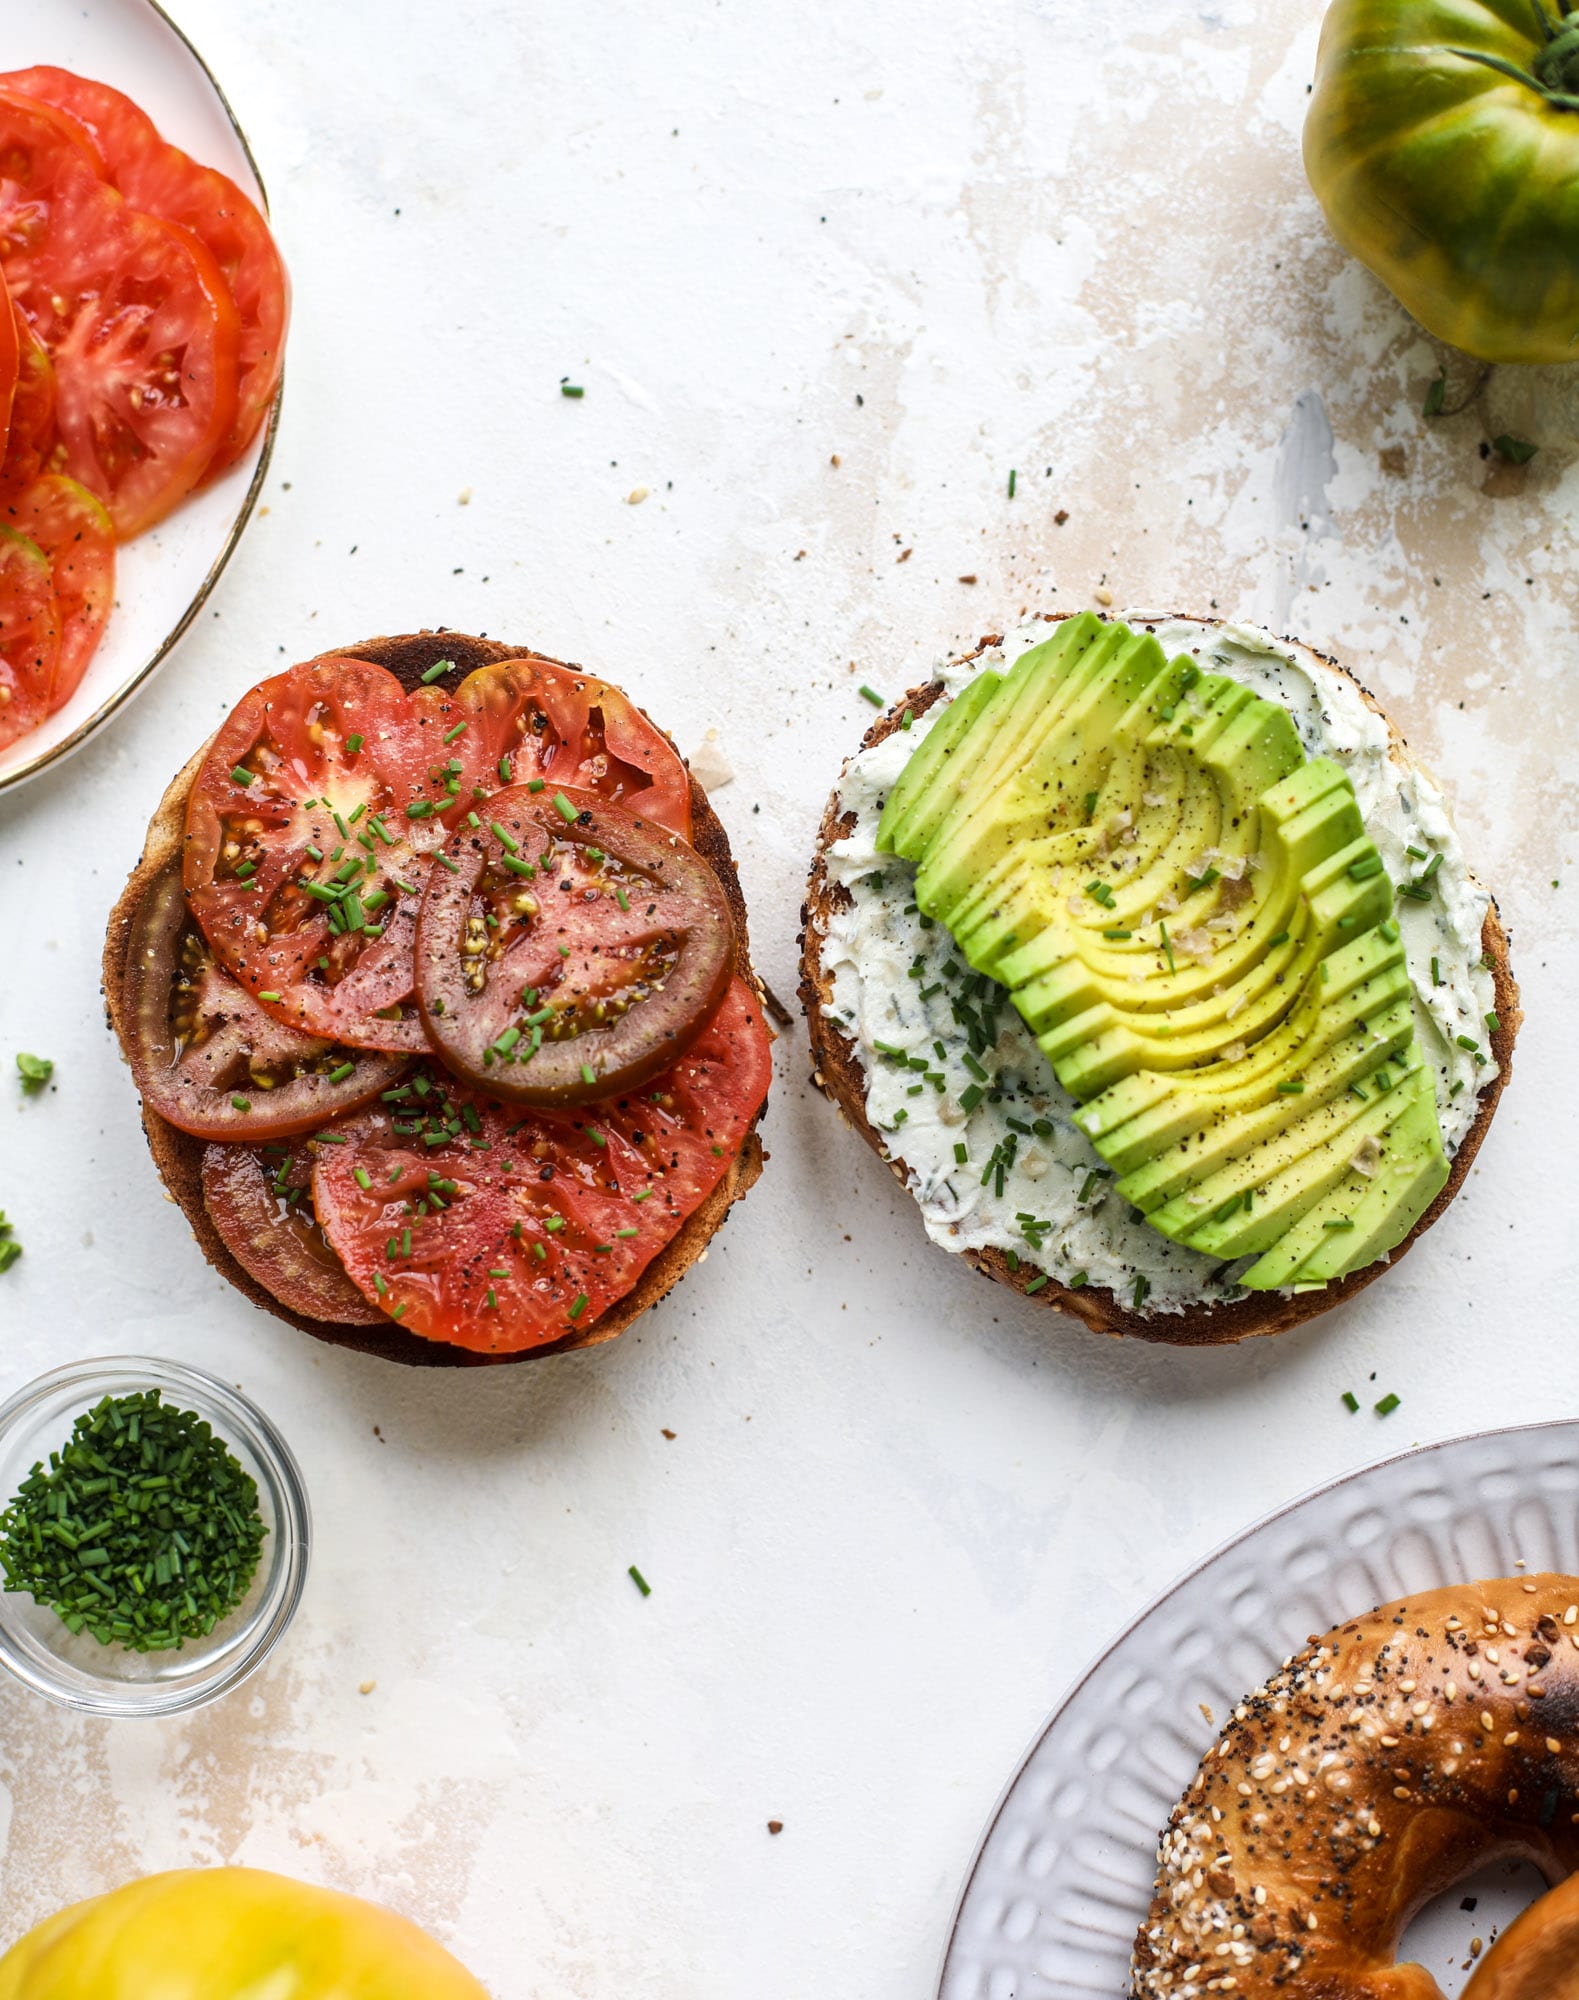 These avocado tomato sandwiches are the perfect lunch! Complete with veggie cream cheese, smoked sea salt, fresh chives and microgreens, the sliced avocado and heirloom tomatoes are sandwiched on an everything bagel for a flavor explosion. I howsweeteats.com #avocado #tomato #sandwich #healthy #lunch